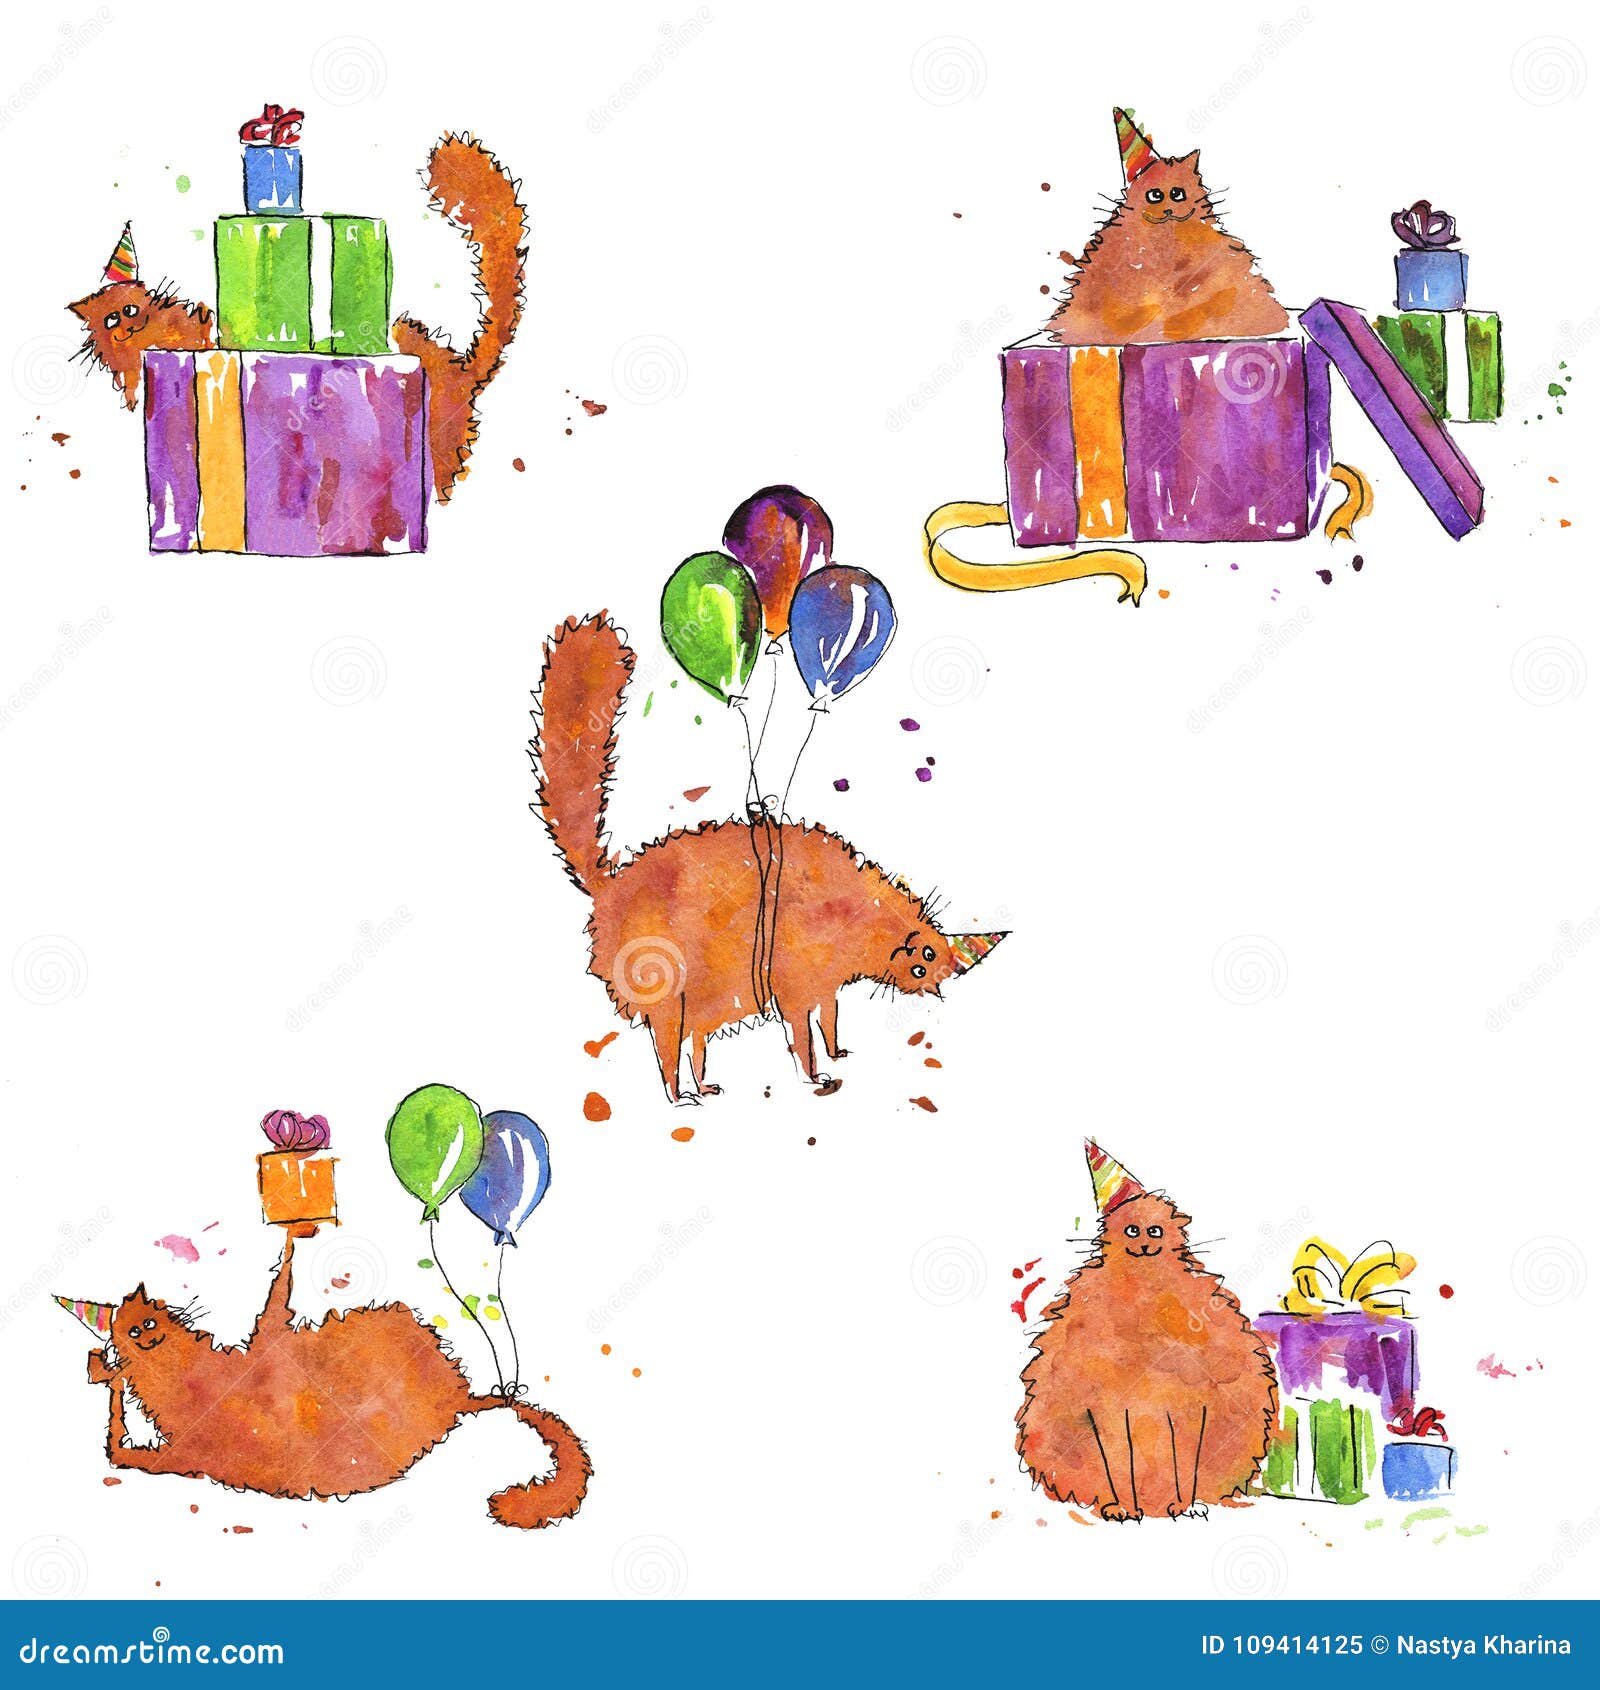 Set of watercolor pictures of a ginger birthday cat. Five hand painted funny pictures of a fat ginger cat with gift boxes and balloons